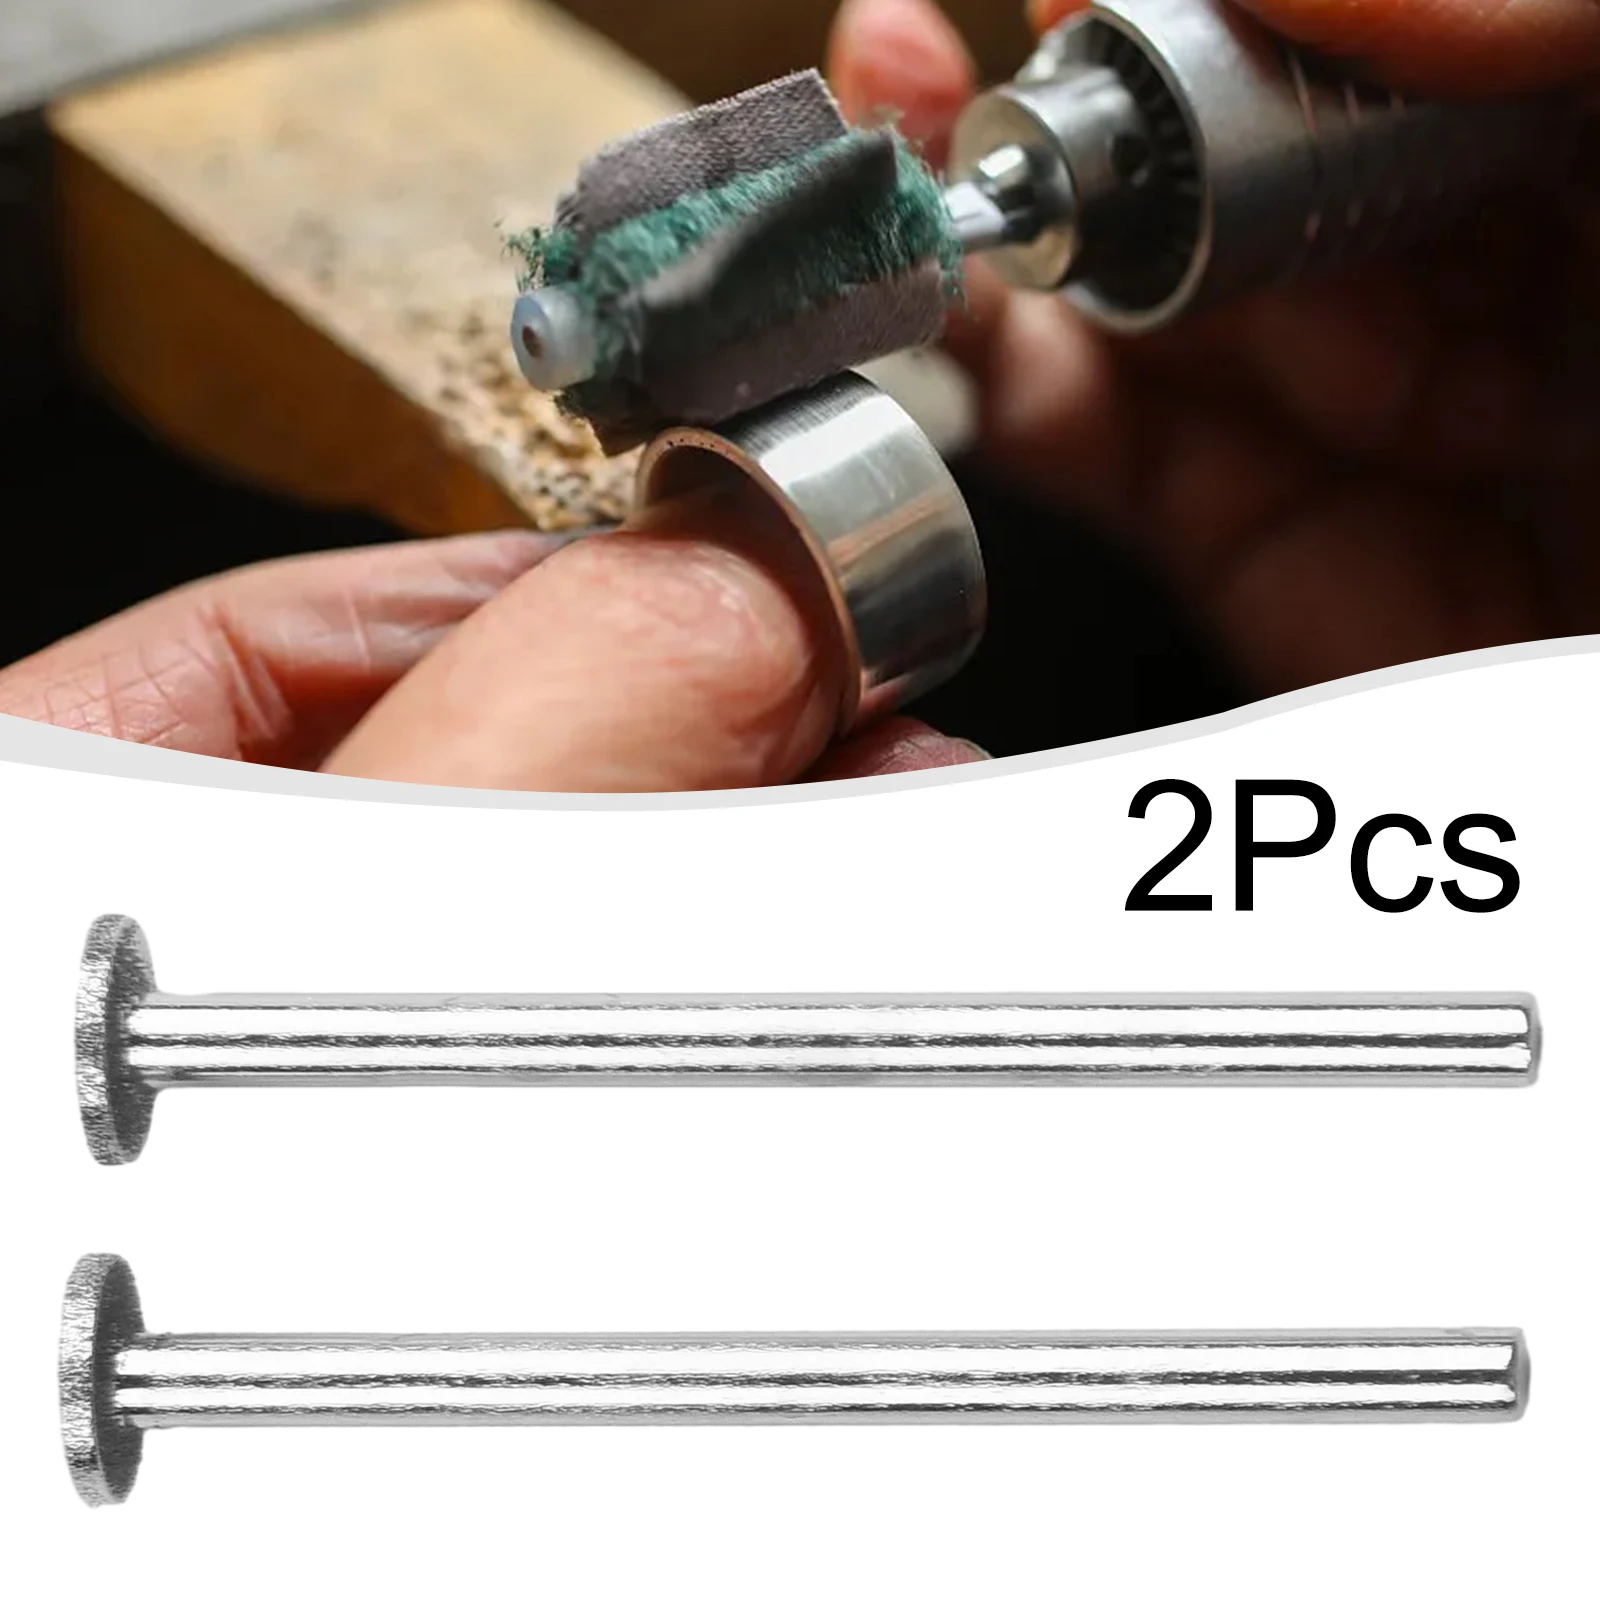 2pcs T Type Grinding Wheel 3mm Shank 6/8/10/10mm Head   45mm Length For The Polishing Of Jade Carving Stone Carving Welding Tool 5 2pcs gps 01 gps 23 gps 30 reed tube length 35cm normally open closed proximity switch small magnetic switch proximity sensor